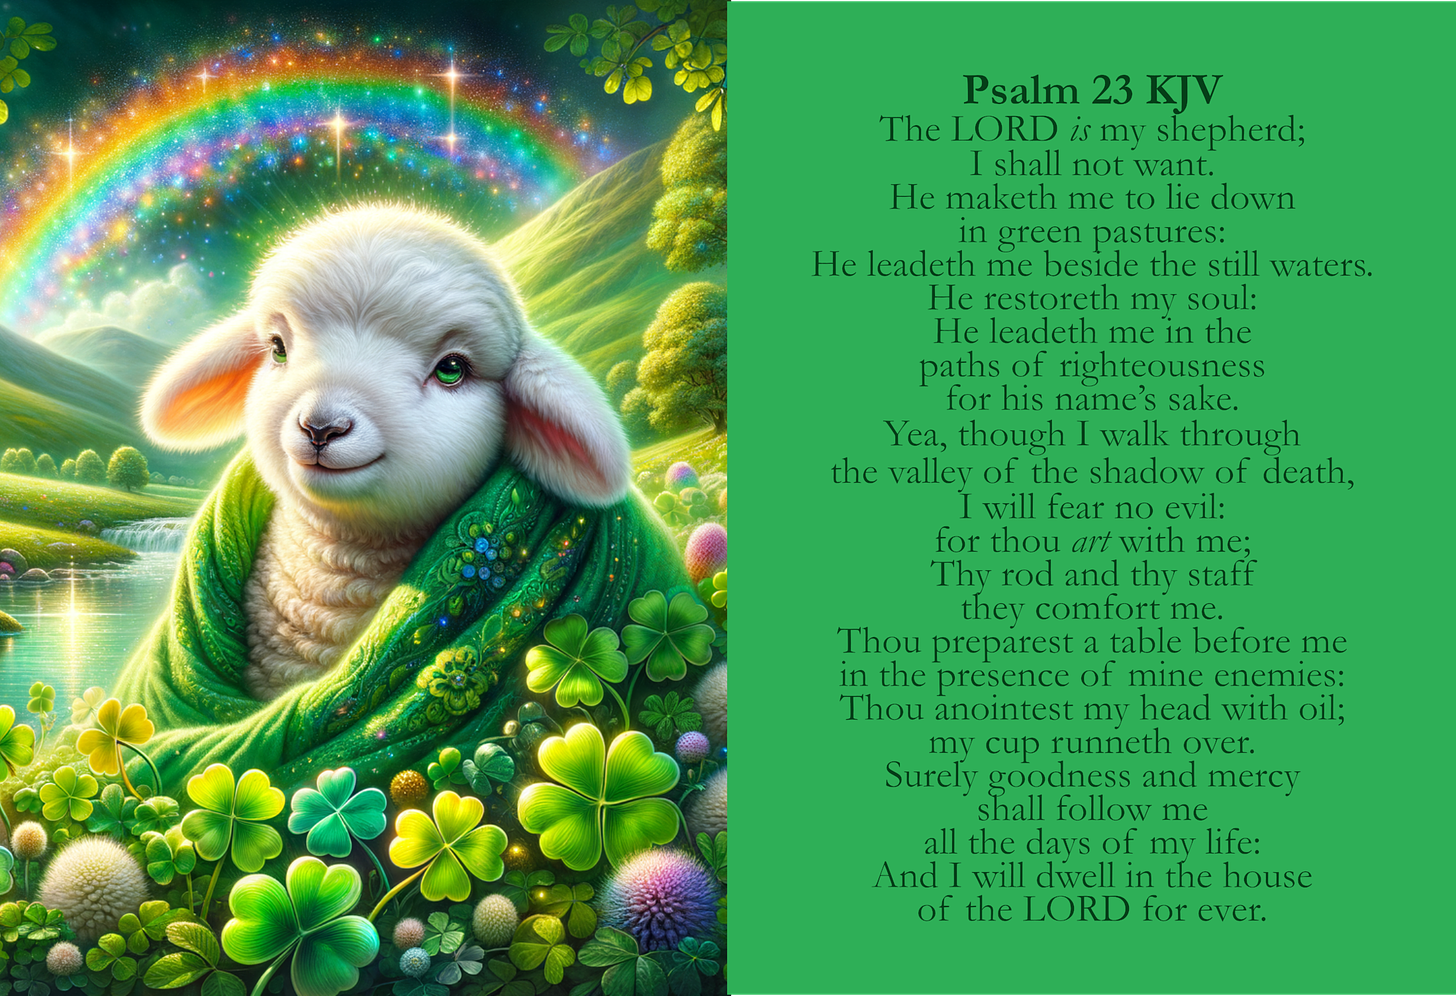 On the left side of the image, there is a highly detailed and idyllic scene rendered with a sense of whimsy and fantasy. A young lamb, with a gentle and joyful expression, sits at the center. It has soft, white fleece that looks fluffy to the touch, and its ears are tinged with a touch of pink, indicating a delicate texture. The lamb's eyes are a light, serene green, matching the shawl it's draped in, which suggests a sense of peace and comfort. The shawl itself is richly decorated with embroidery and gem-like embellishments that sparkle, adding a touch of magic. Surrounding the lamb, the ground is carpeted with a verdant array of plants, mainly clovers with a notable abundance of four-leaf clovers, which traditionally symbolize good luck. Amidst these are dotted colorful flowers, ranging from purple to pink hues, which add vibrancy to the scene.  In the background, the meadow transitions into softly rolling hills, suggesting a peaceful and untouched landscape. A calm river meanders through the valley, reflecting the light from above. Overarching the entire scene is a magnificent celestial rainbow that spans a spectrum of colors, from a deep violet to a warm red at the edges. This rainbow is not just a band of colors; it's interlaced with shimmering stars and nebula-like clouds, giving it a dreamlike quality as if it's not just a meteorological phenomenon but a bridge to a fantastical realm.  The right side of the image is a stark contrast to the left, dedicated entirely to text set against a solid green backdrop, which echoes the greenery in the illustration. The text is arranged in a block and is composed of several stanzas from Psalm 23 of the Bible. It's presented in a formal, serif font that conveys a sense of tradition and reverence. The color of the text is white, which stands out against the green background, making it easily readable. The passage speaks to the spiritual guidance and protection provided by the Lord, using the pastoral metaphor of a shepherd caring for his flock, which ties back to the image of the lamb on the left, creating a symbolic connection between the text and the illustration.  Overall, the image is a harmonious blend of a rich, imaginative illustration and a spiritual, reflective text, designed to evoke feelings of comfort, faith, and the beauty of nature.